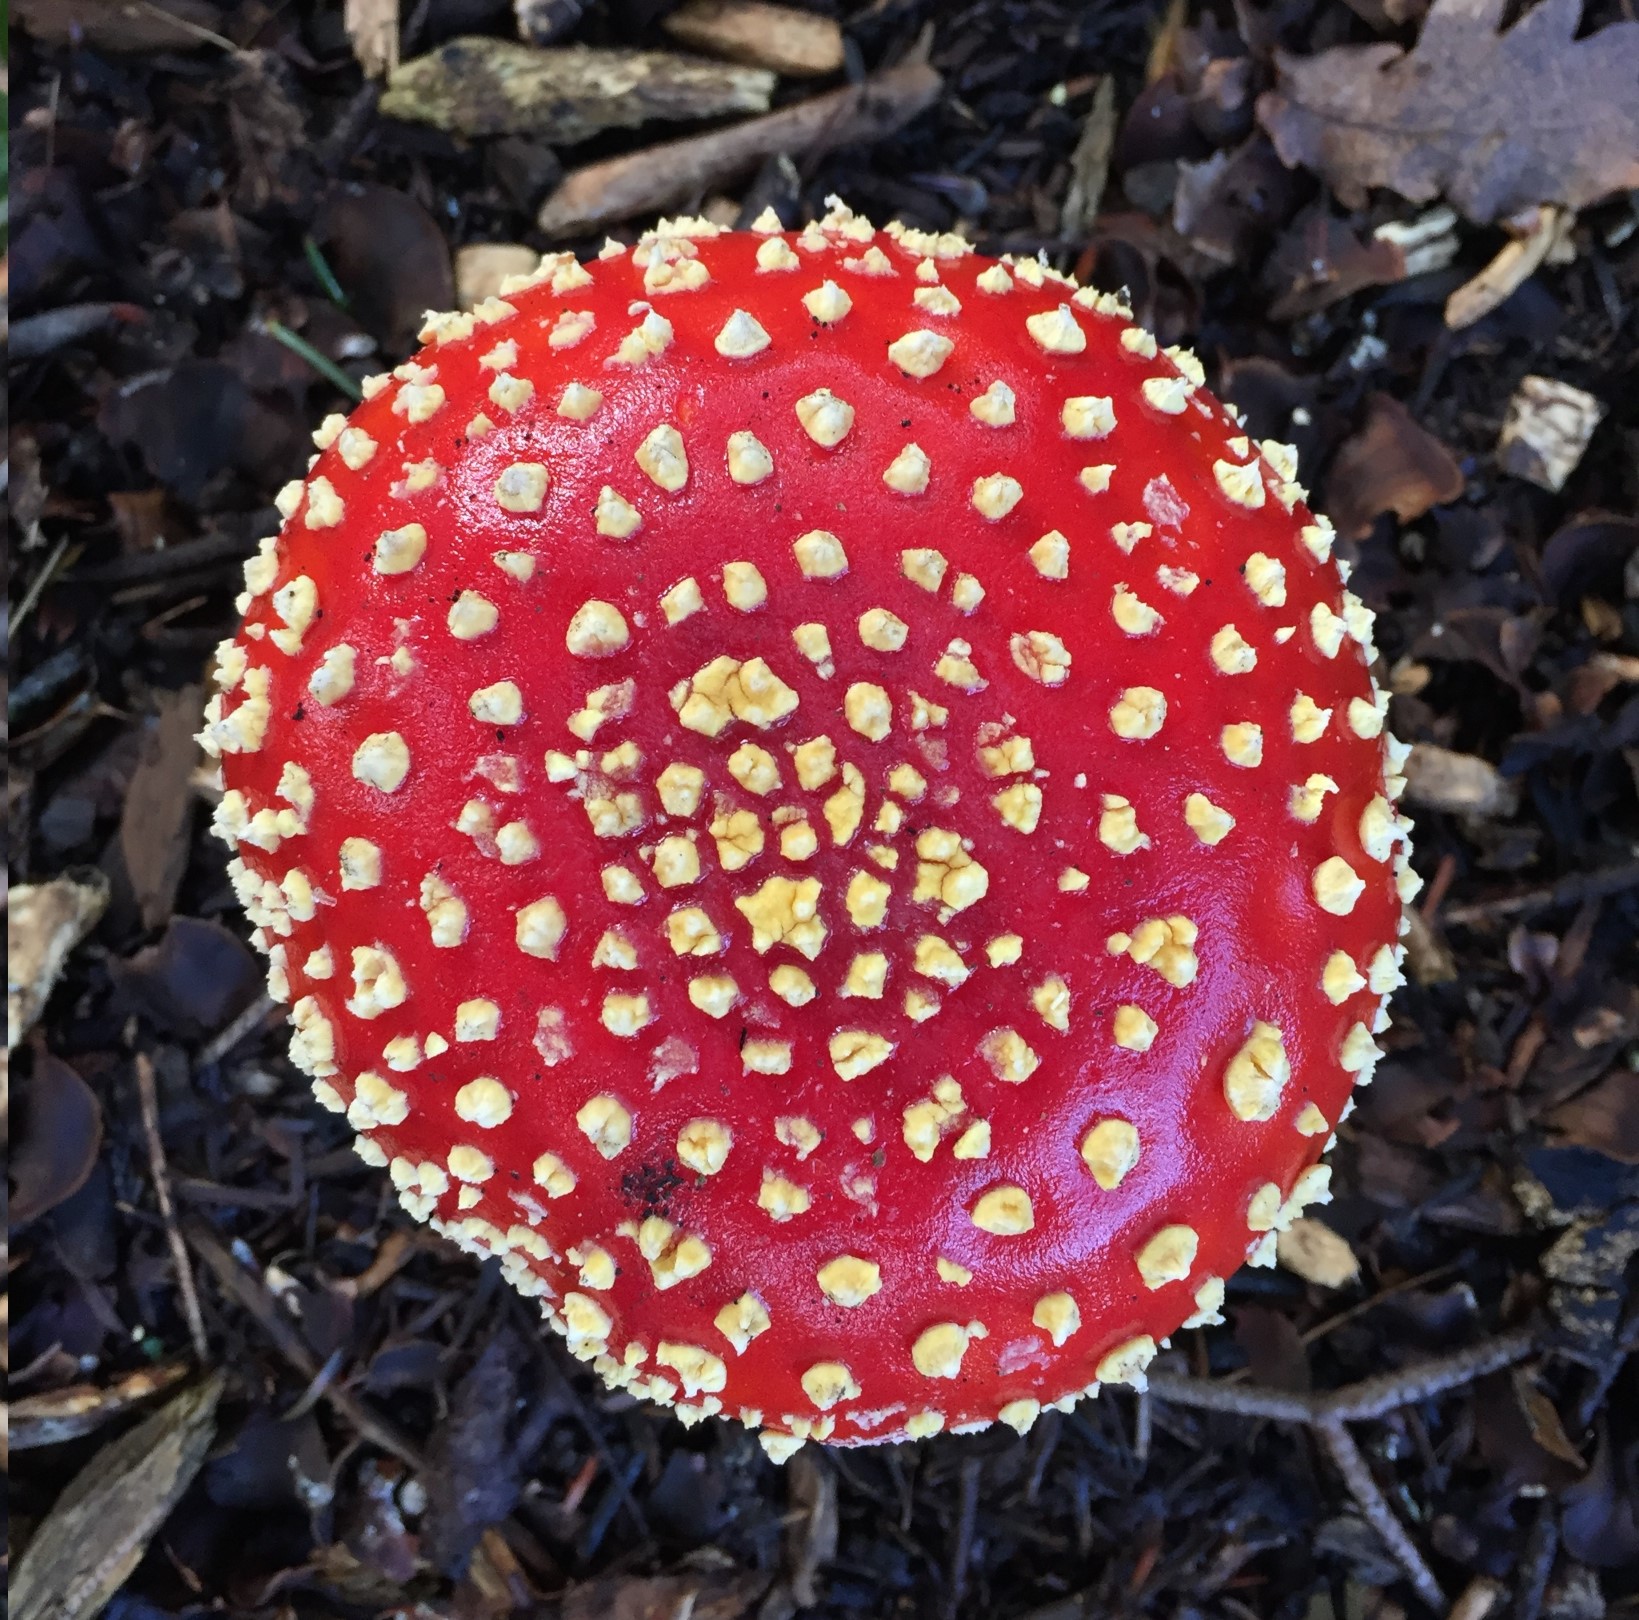 Fly agaric (Amanita muscaria) bright red mushroom with cream spots and white stalk.